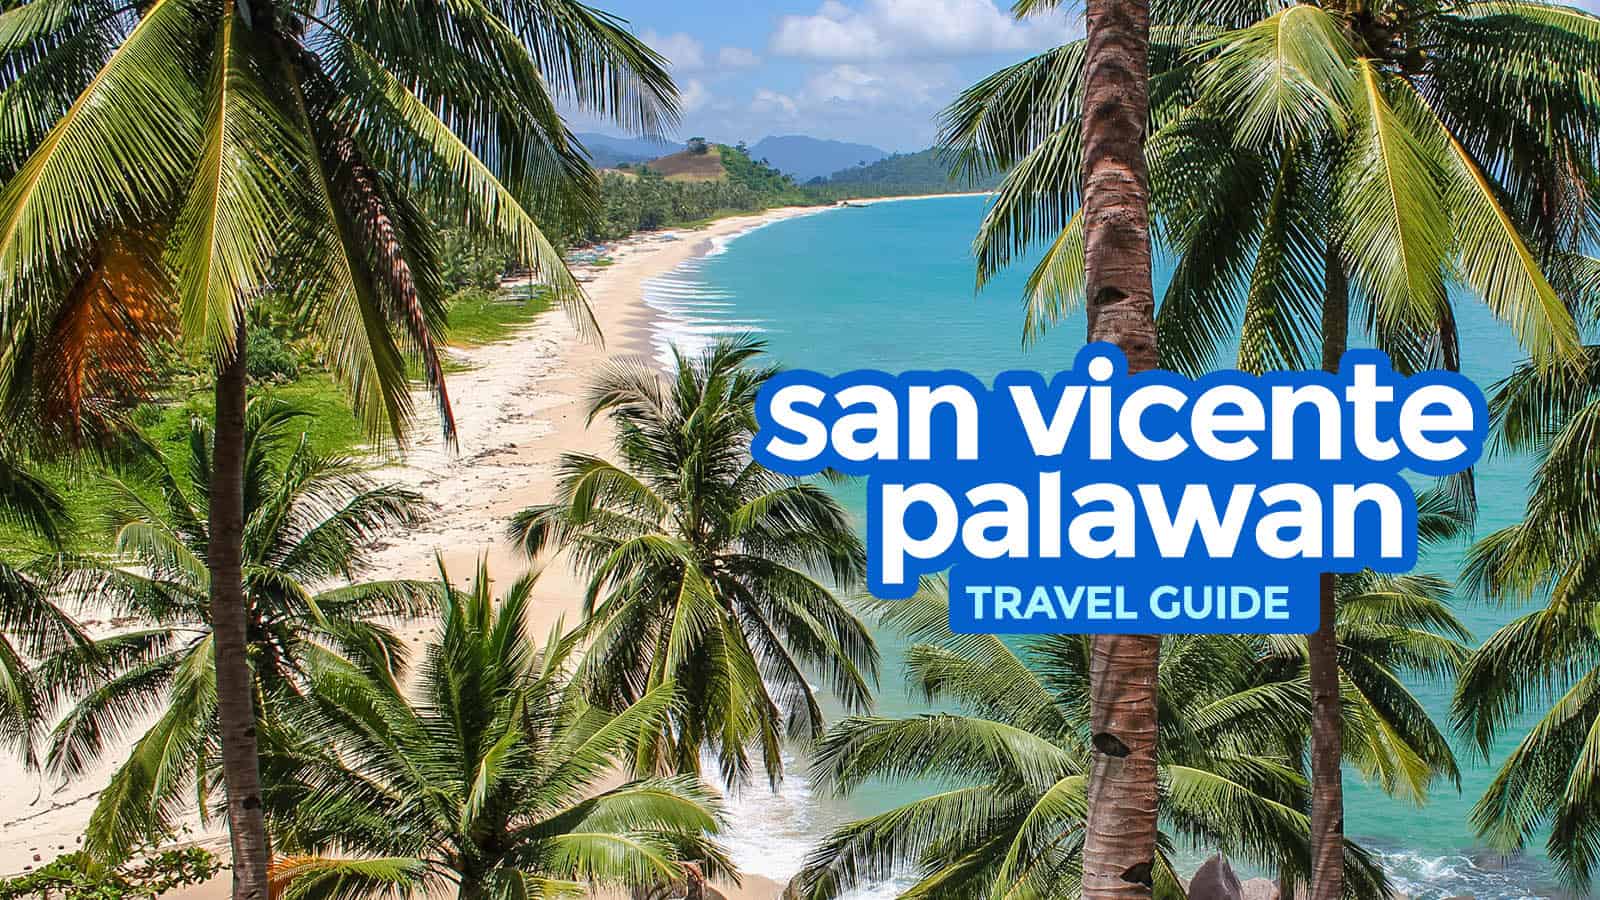 SAN VICENTE PALAWAN Travel Guide with Budget Itinerary